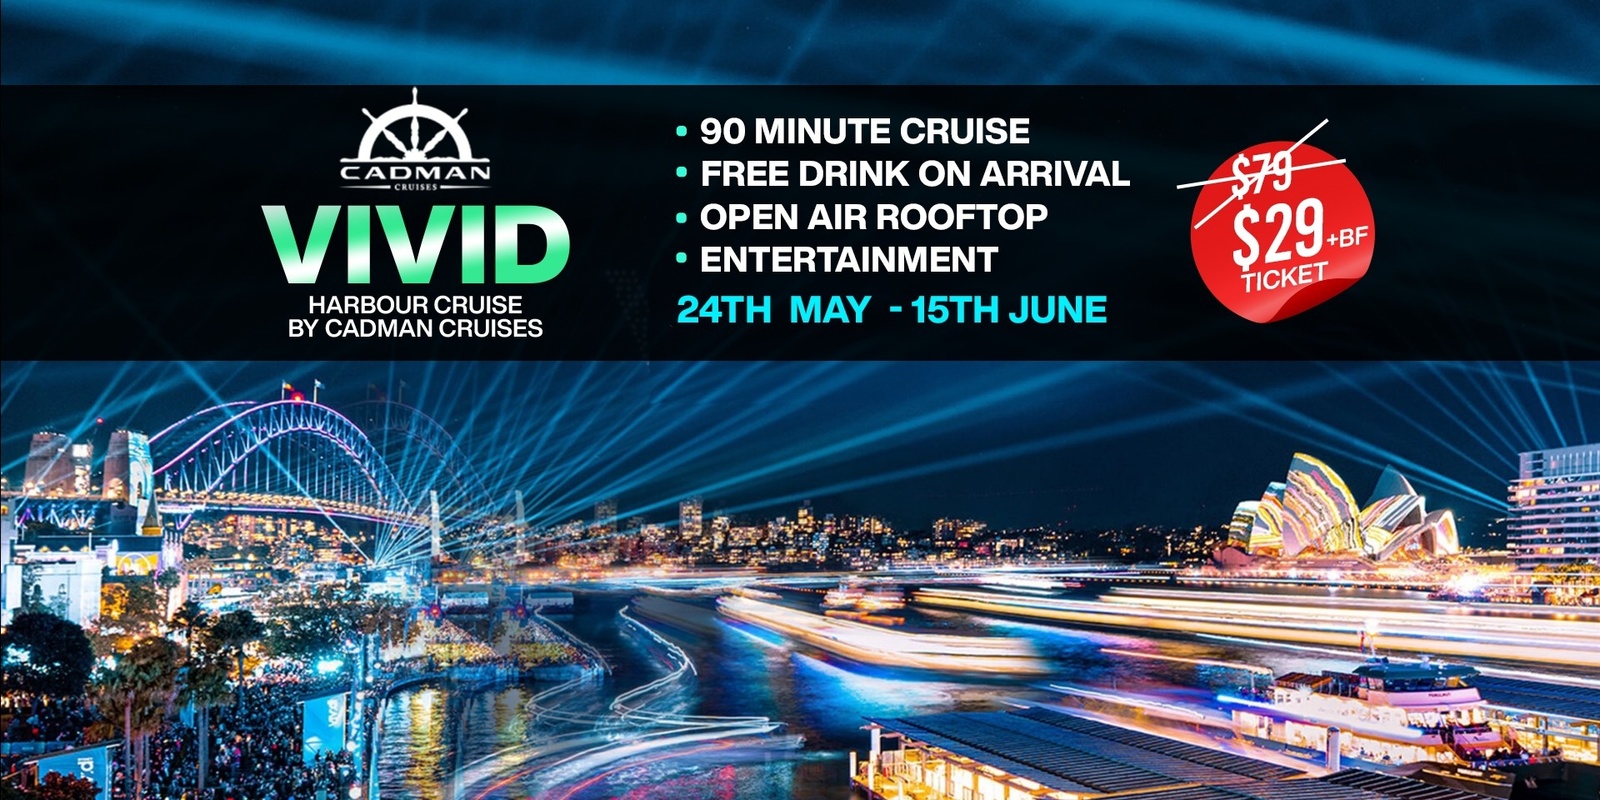 Banner image for Cadman Cruises - VIVID Harbour Cruise with Free Drink on Arrival - $29 Special